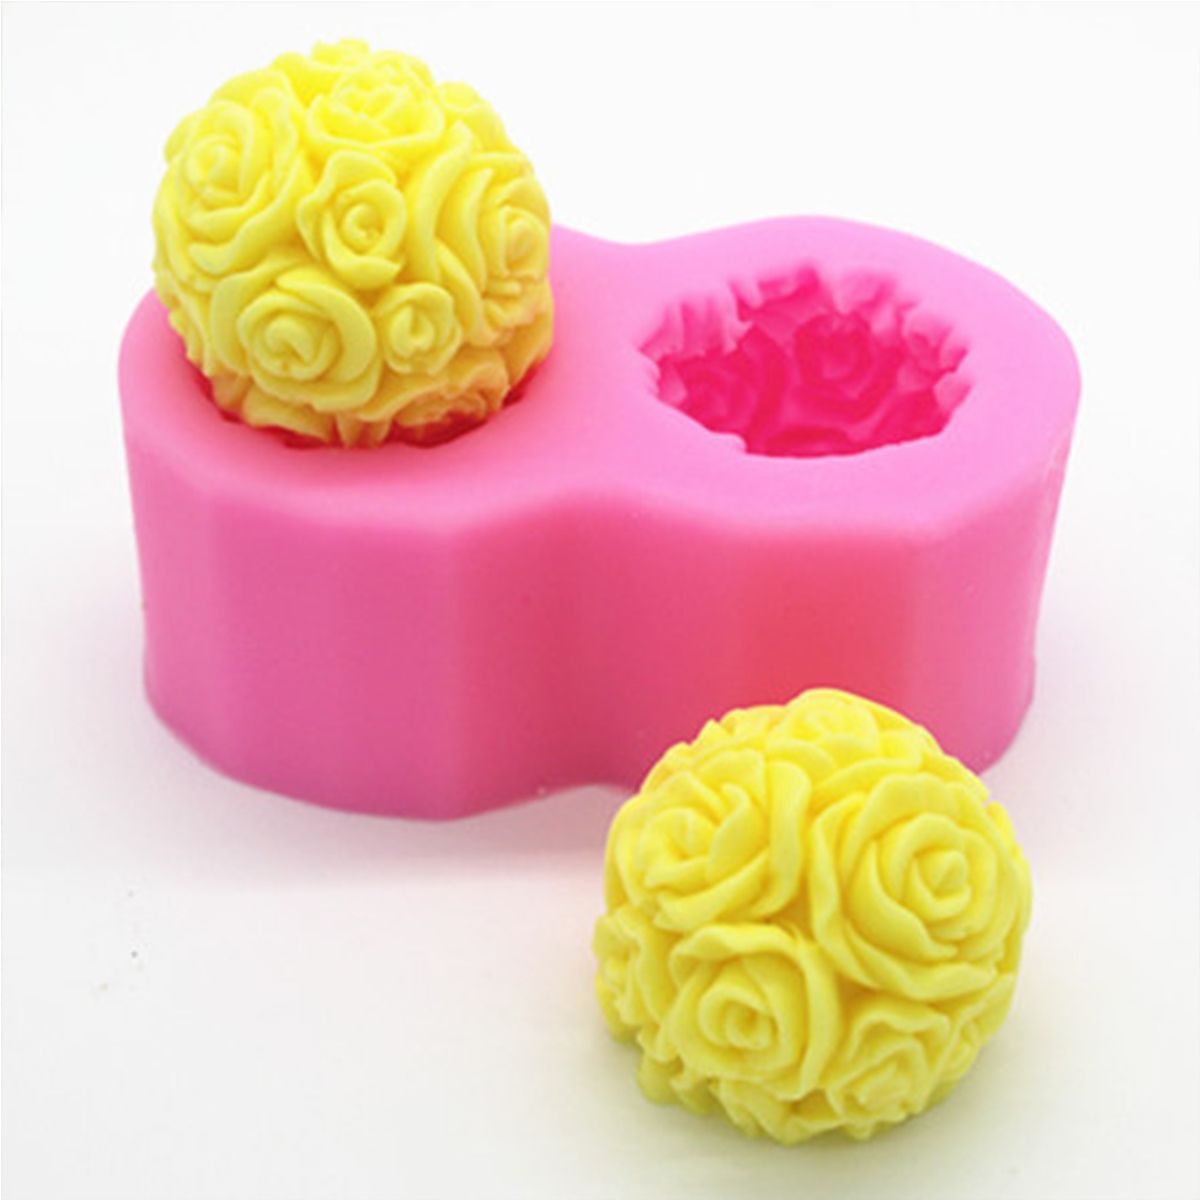 Flexible-3D-Rose-Flower-Ball-Mould-Soft-Silicone-Soap-Candle-Making-DIY-Mold-1391930